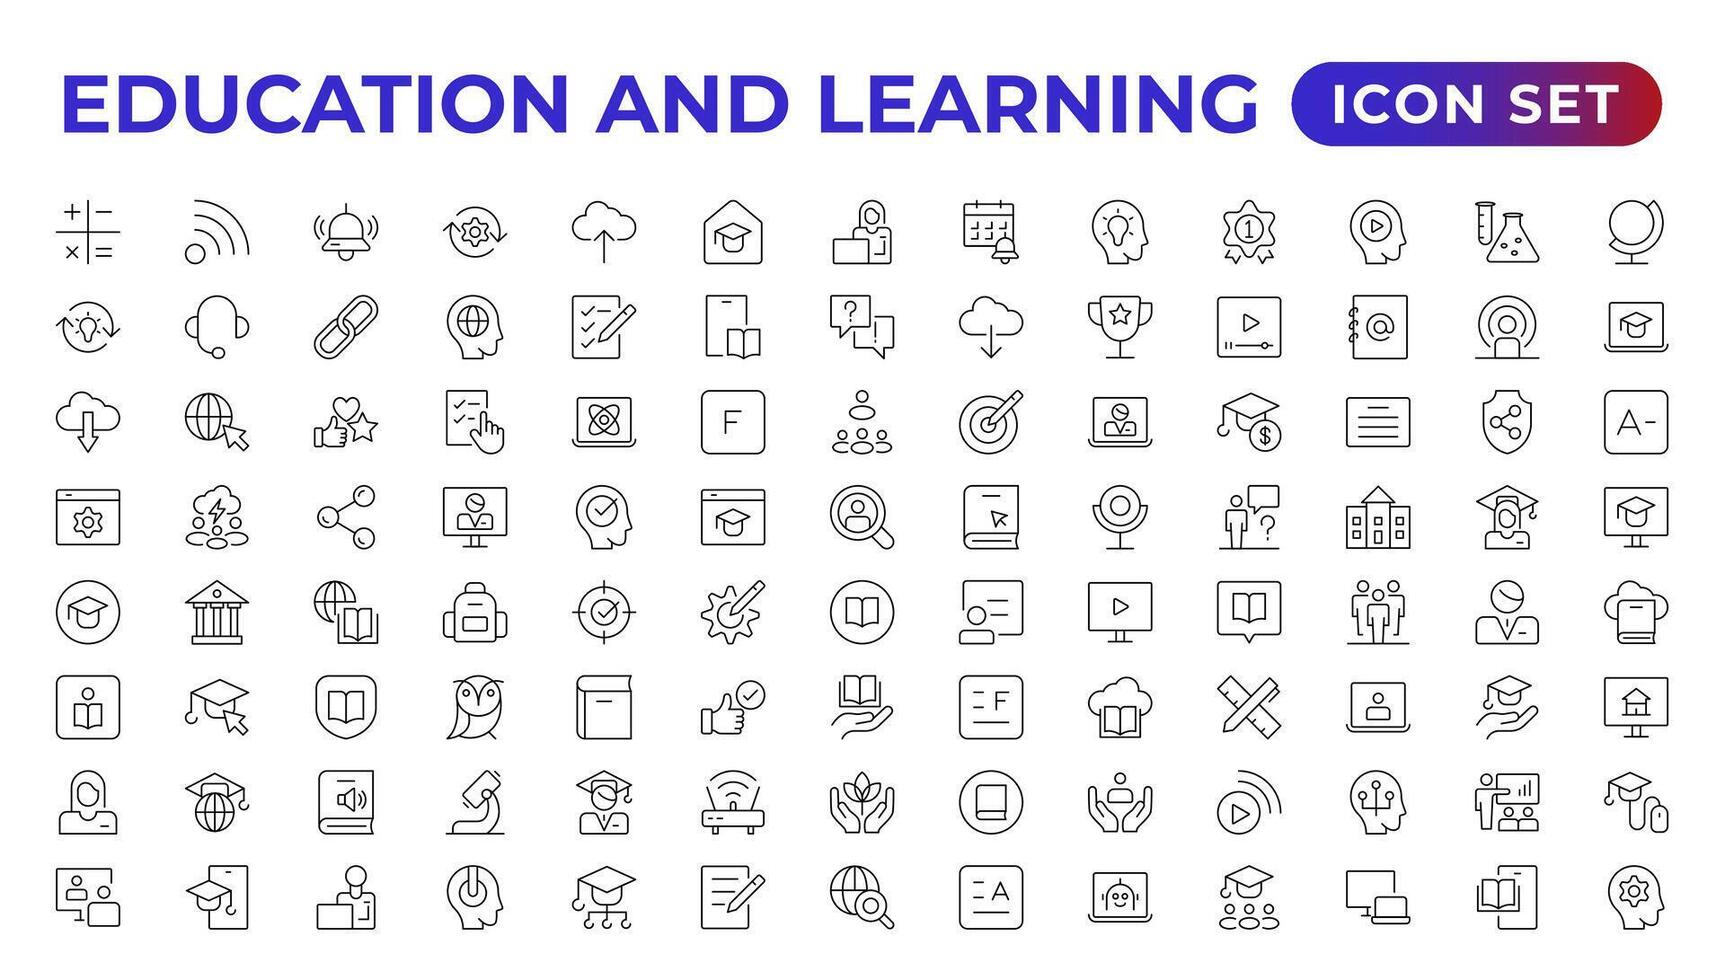 Education line icon collection.Contains knowledge, college, task list, design, training, idea, teacher, file, graduation hat, institute, ruler,and telescope.Education set of web icons in style. vector